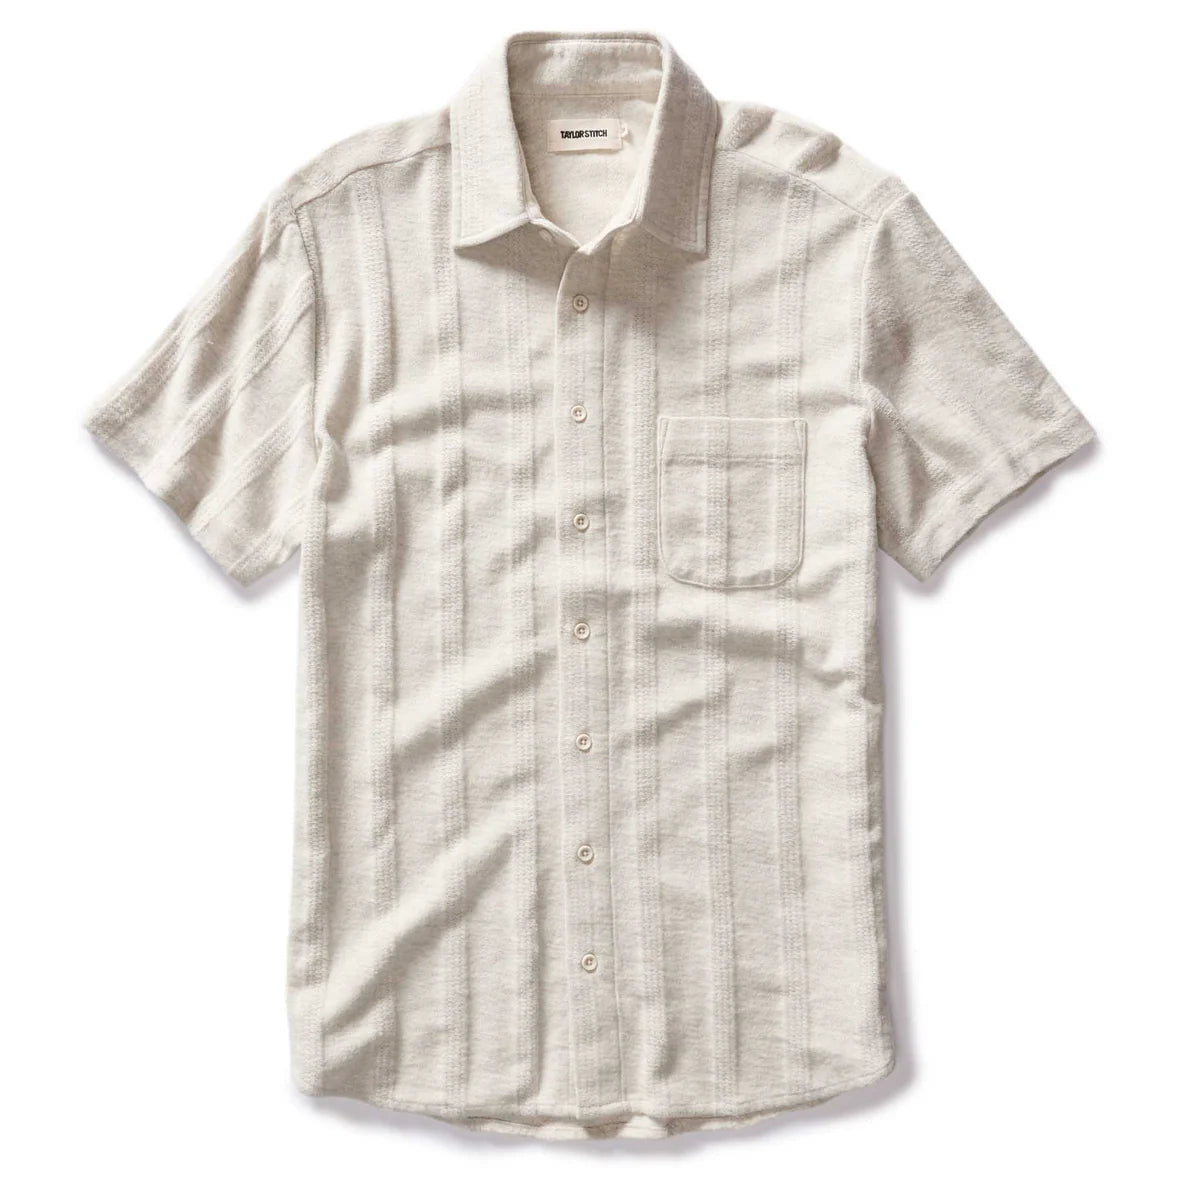 Taylor Stitch - Short Sleeve California in Heather Ash Pointelle